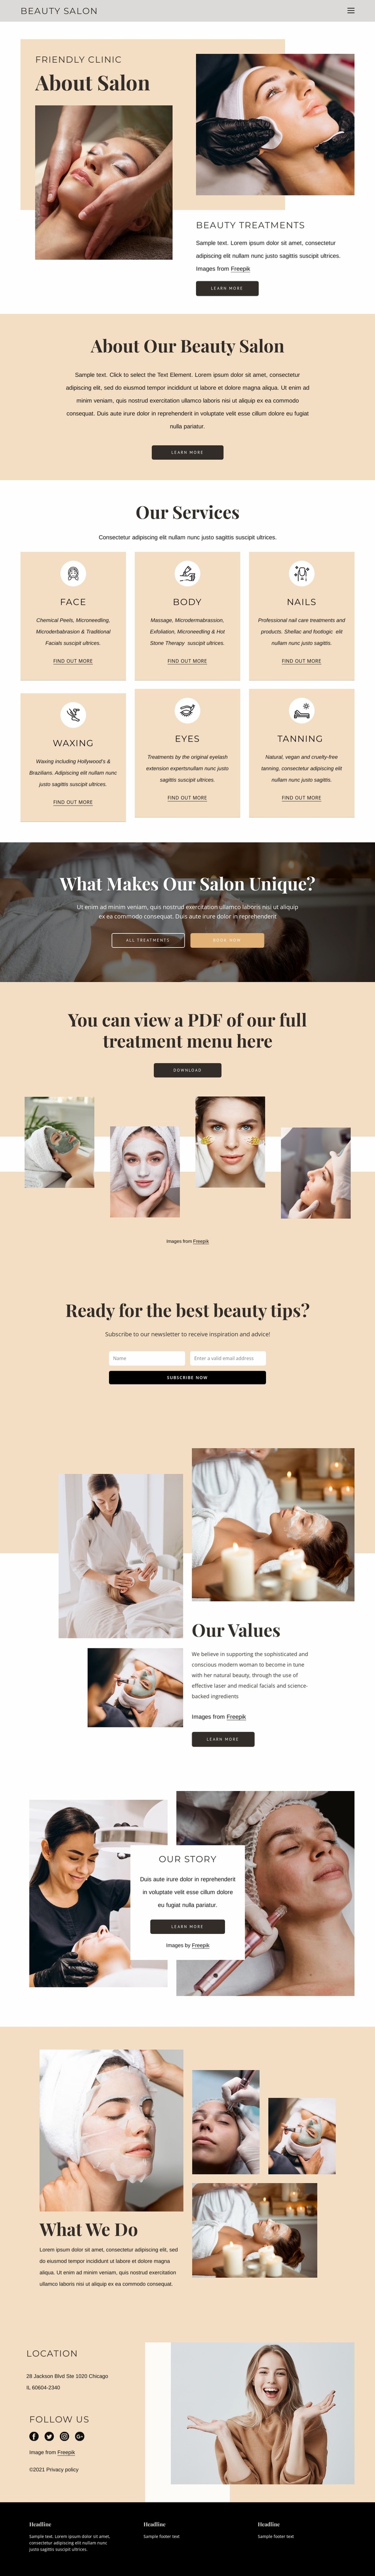 Beauty and aesthetic treatments Website Template